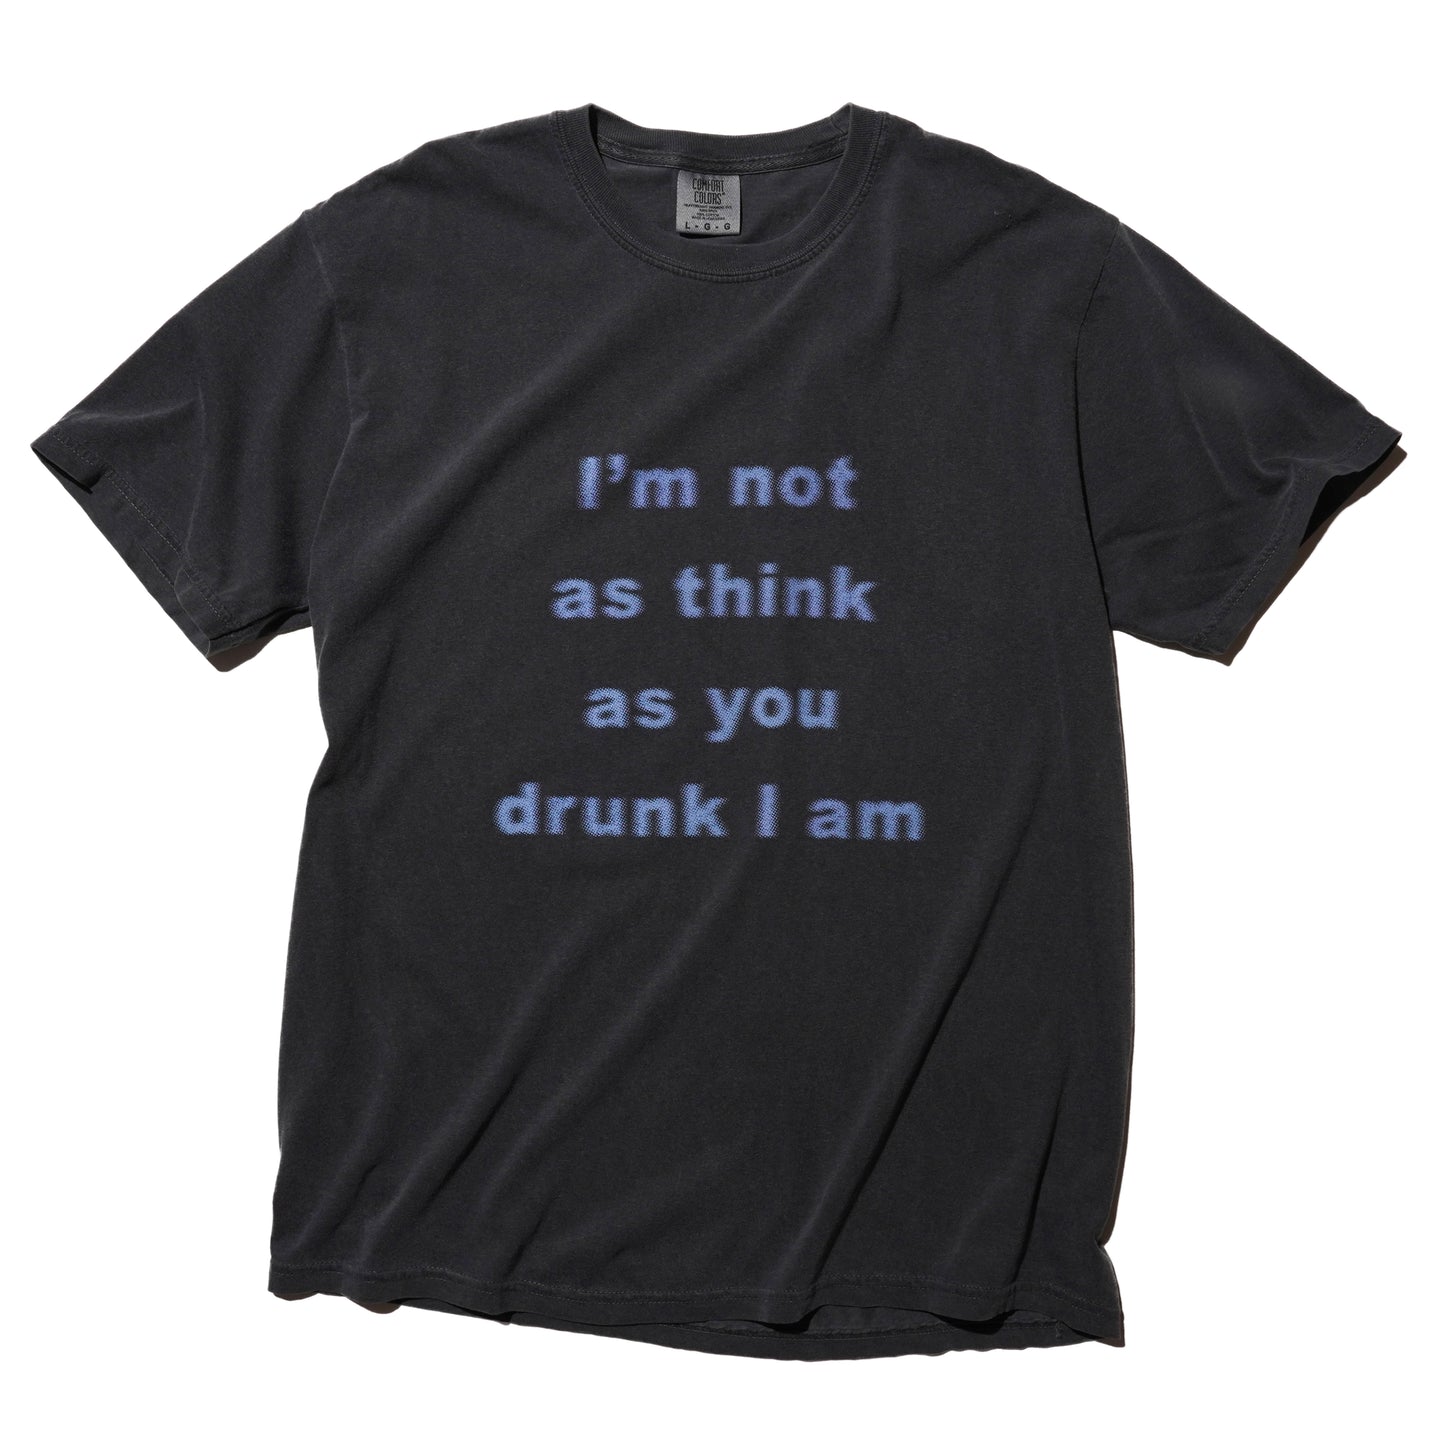 I'M NOT AS THINK AS YOU DRUNK I AM T-SHIRT